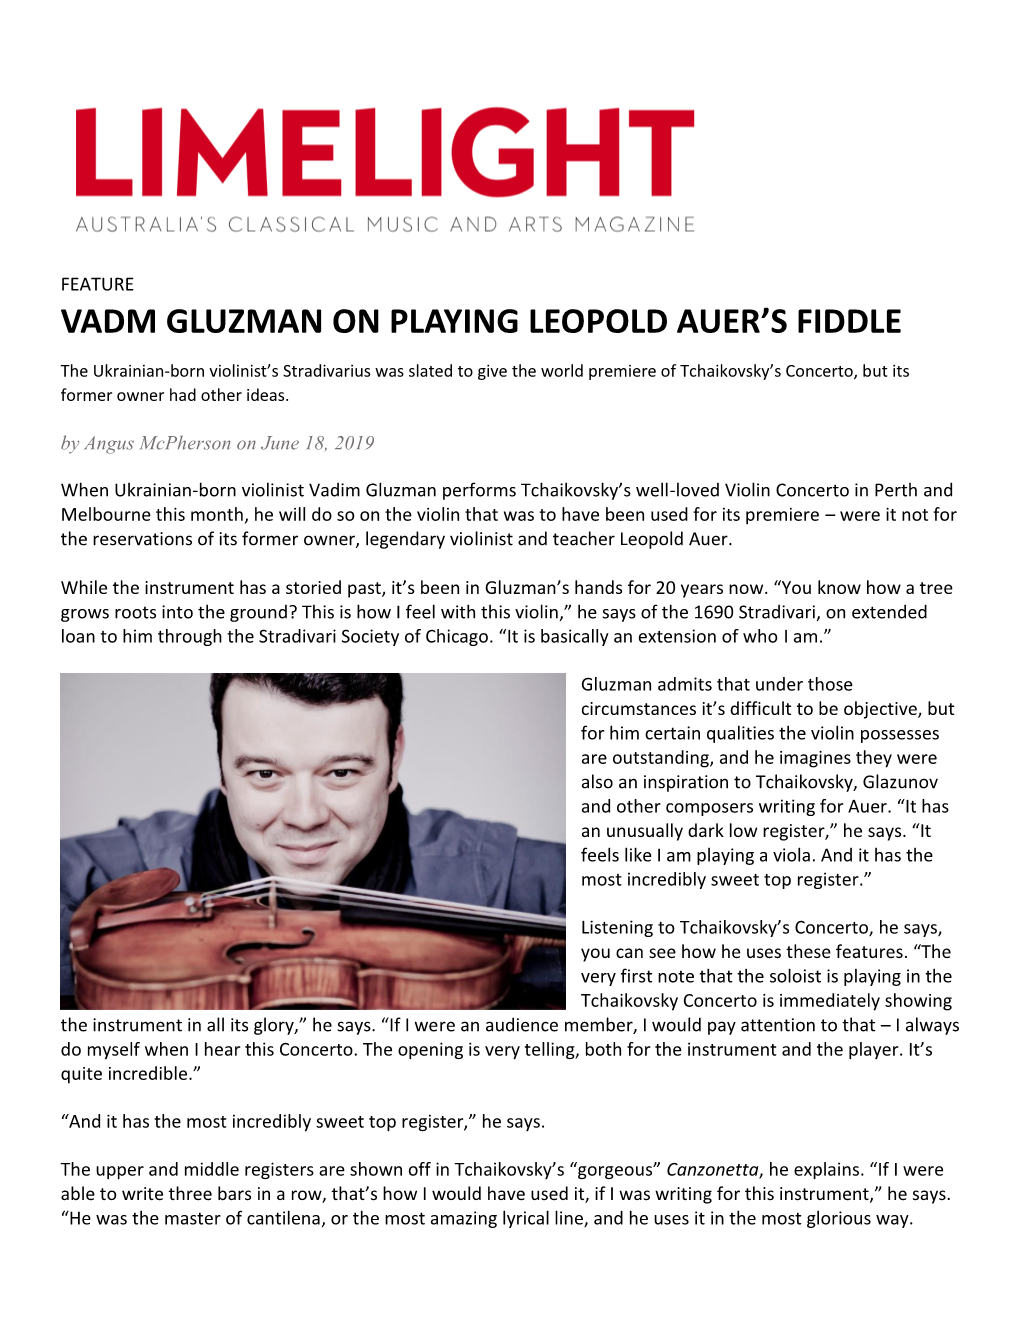 Vadm Gluzman on Playing Leopold Auer's Fiddle